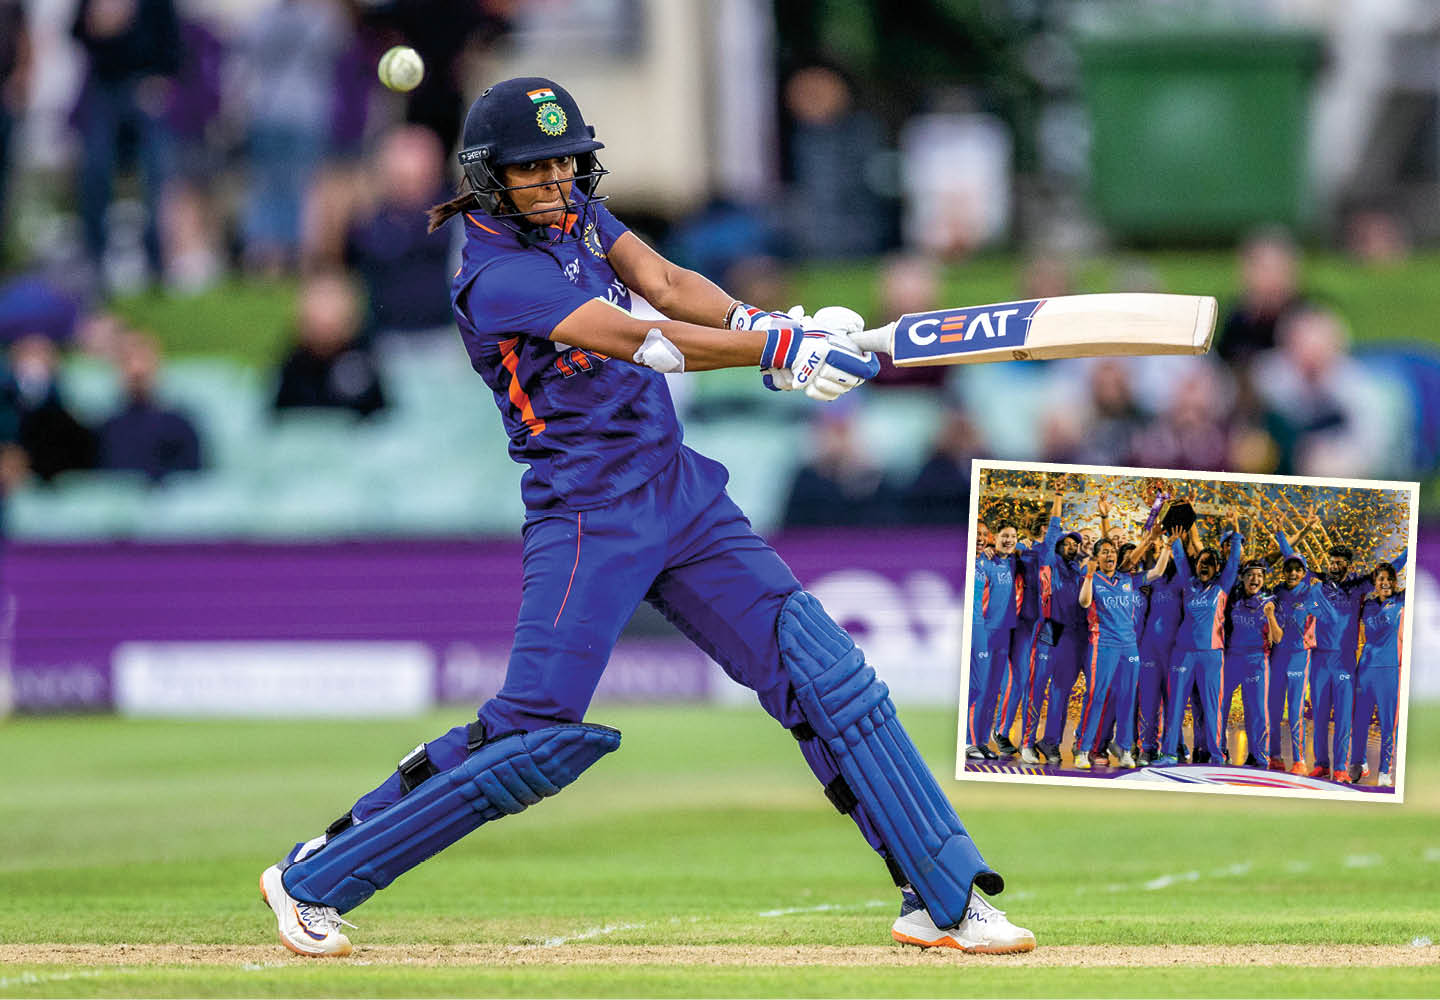 Image of a professional cricket player in action and image of team celebrating